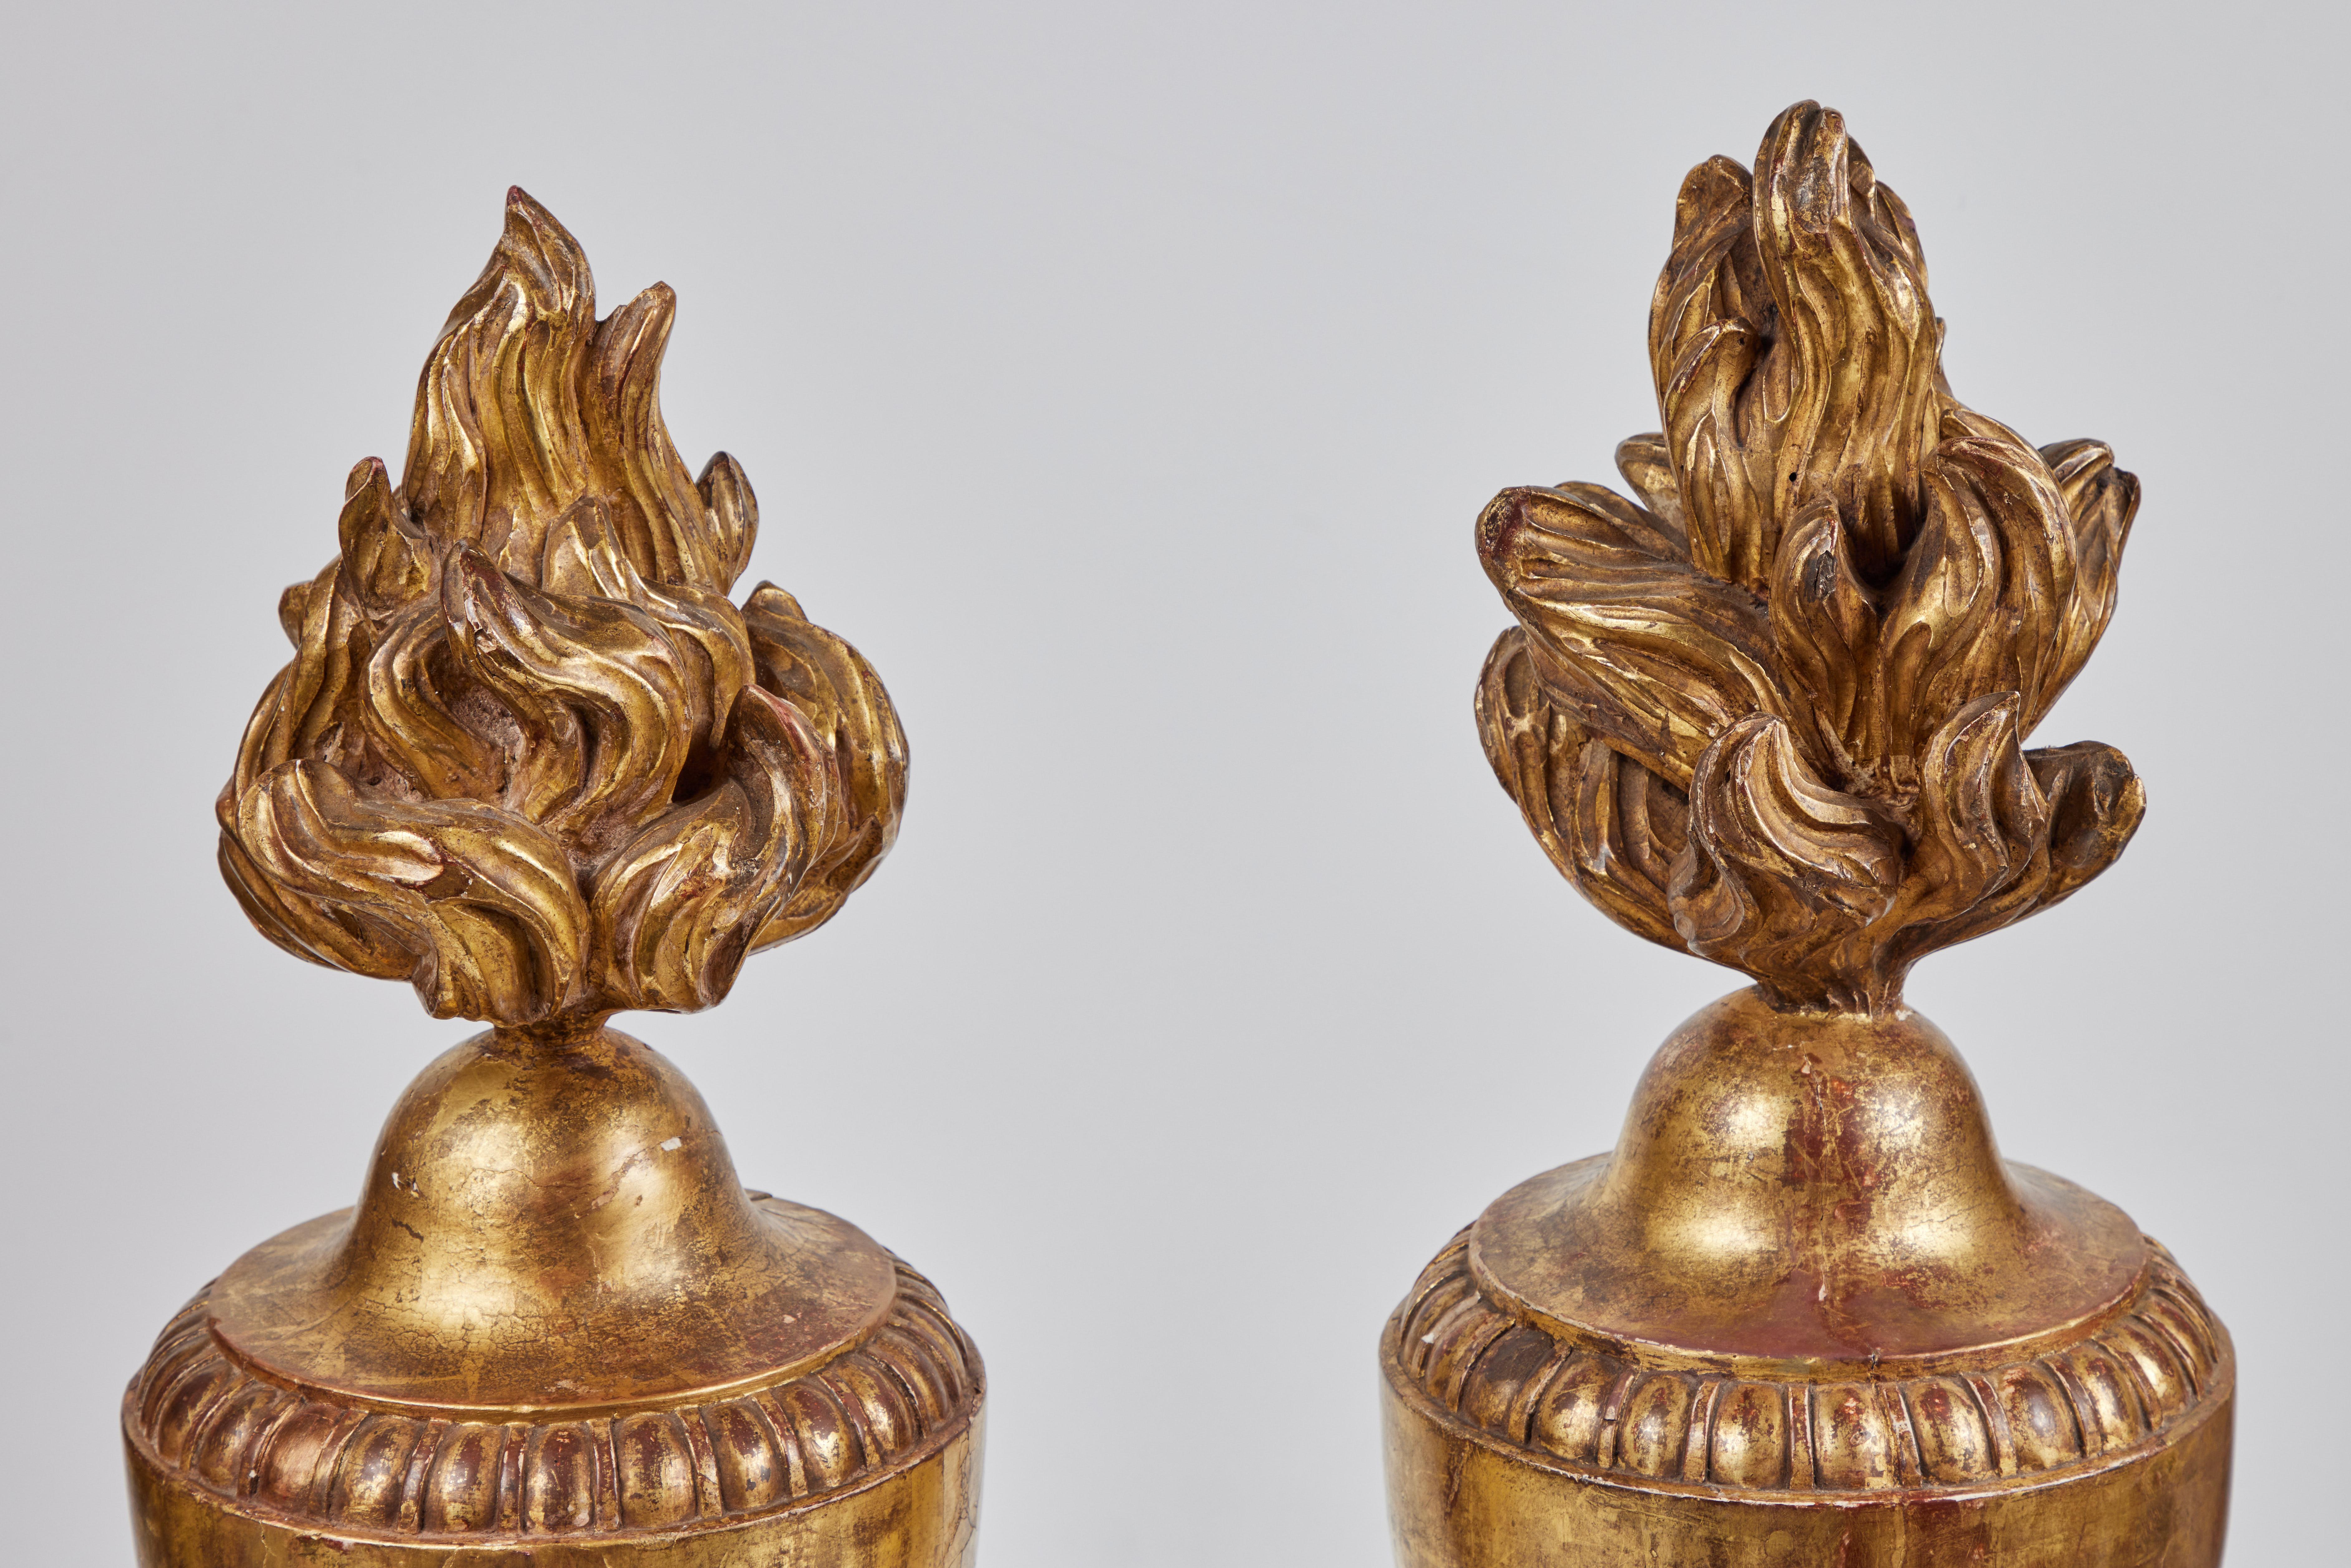 A dramatic pair of hand-carved, gessoed and 22k gold gilded, urn-form balustrade finials surmounted by flame forms. Each on a tapered foot with a pearl relief embellishment.